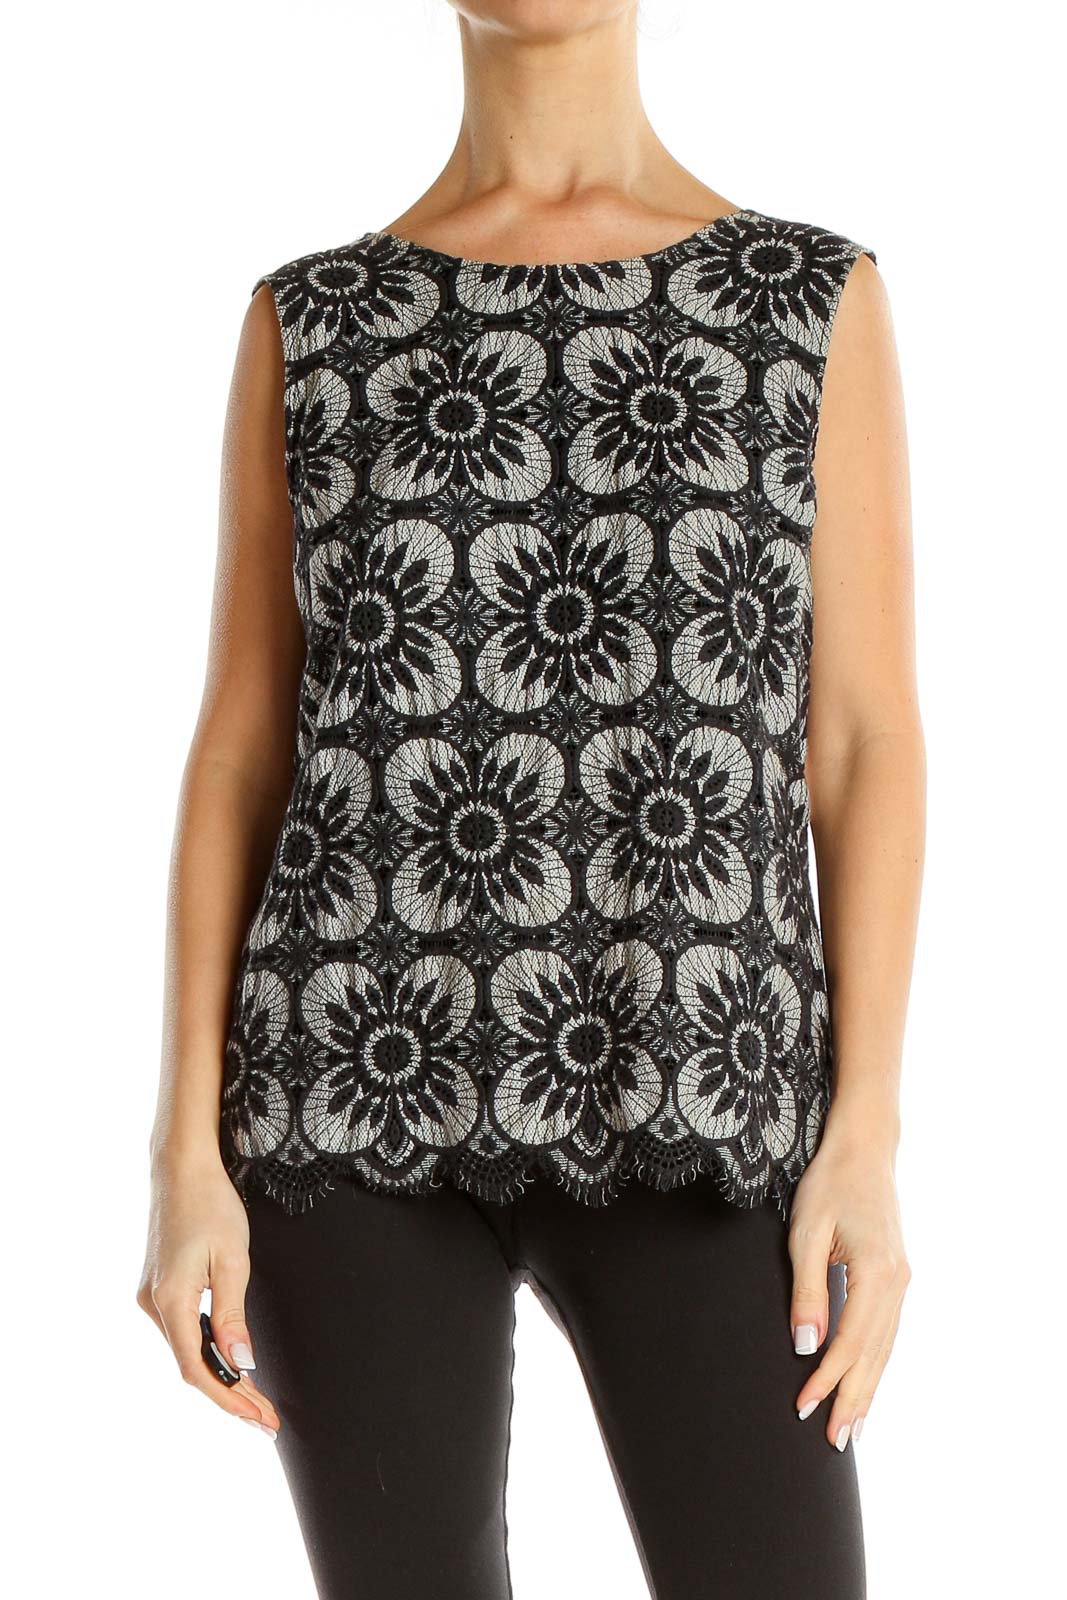 Gray Black Embroidered Floral Print Bohemian Top Front